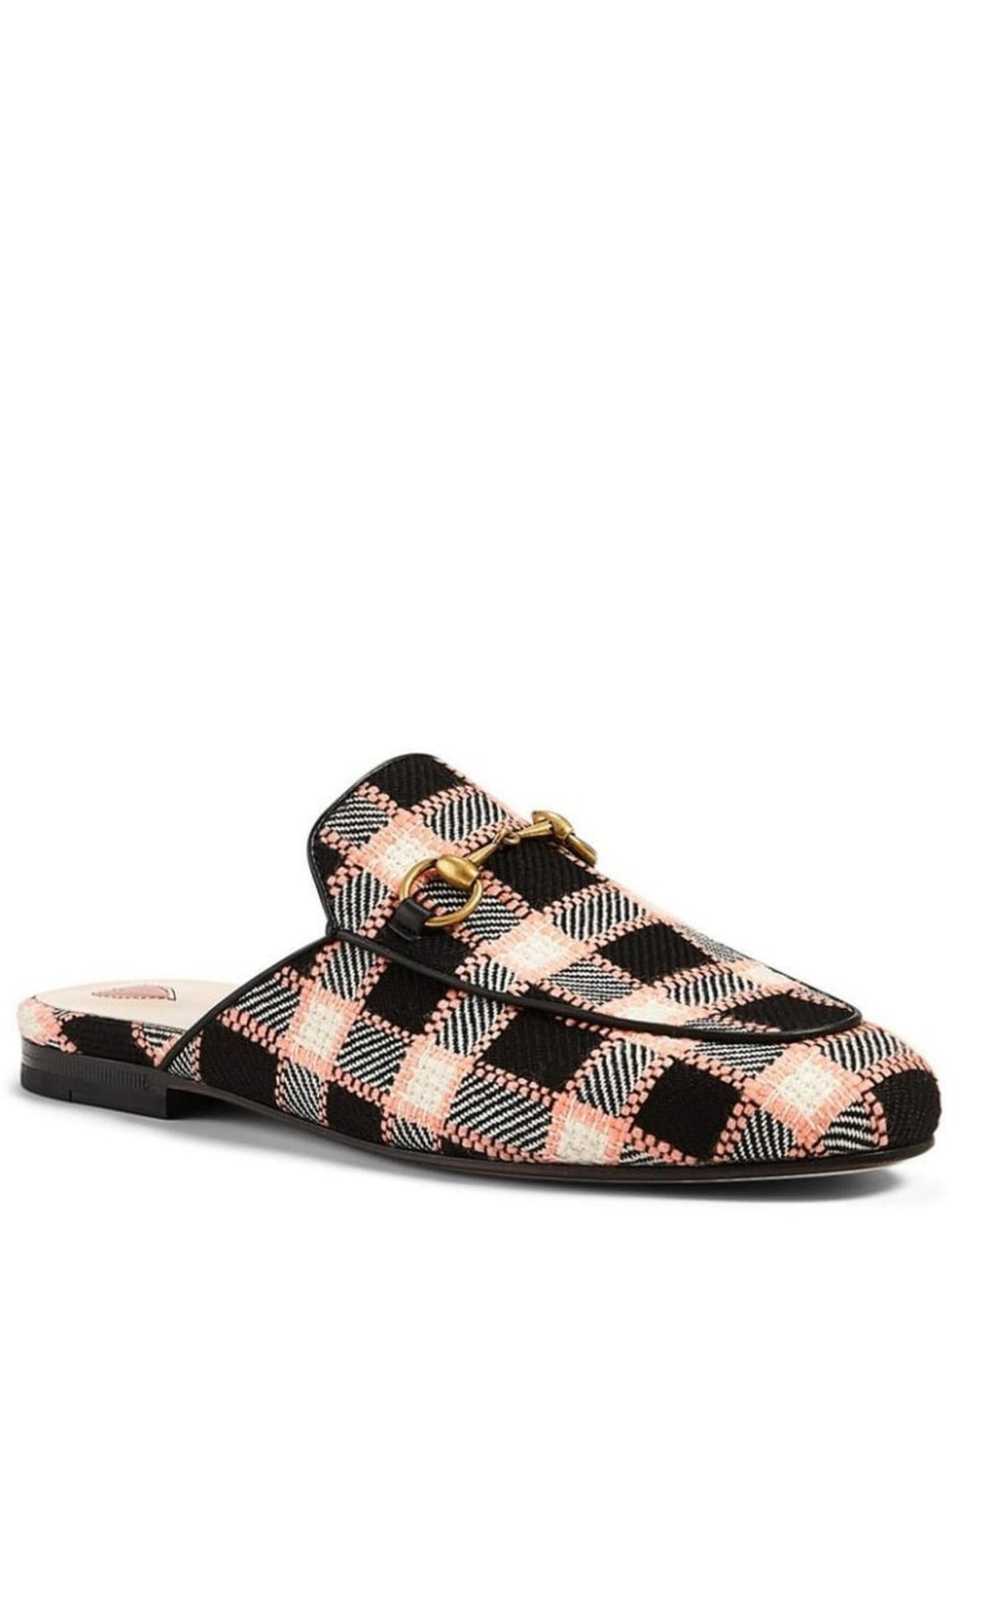 GUCCI Princetown Tweed Check Woven Mules - image 2